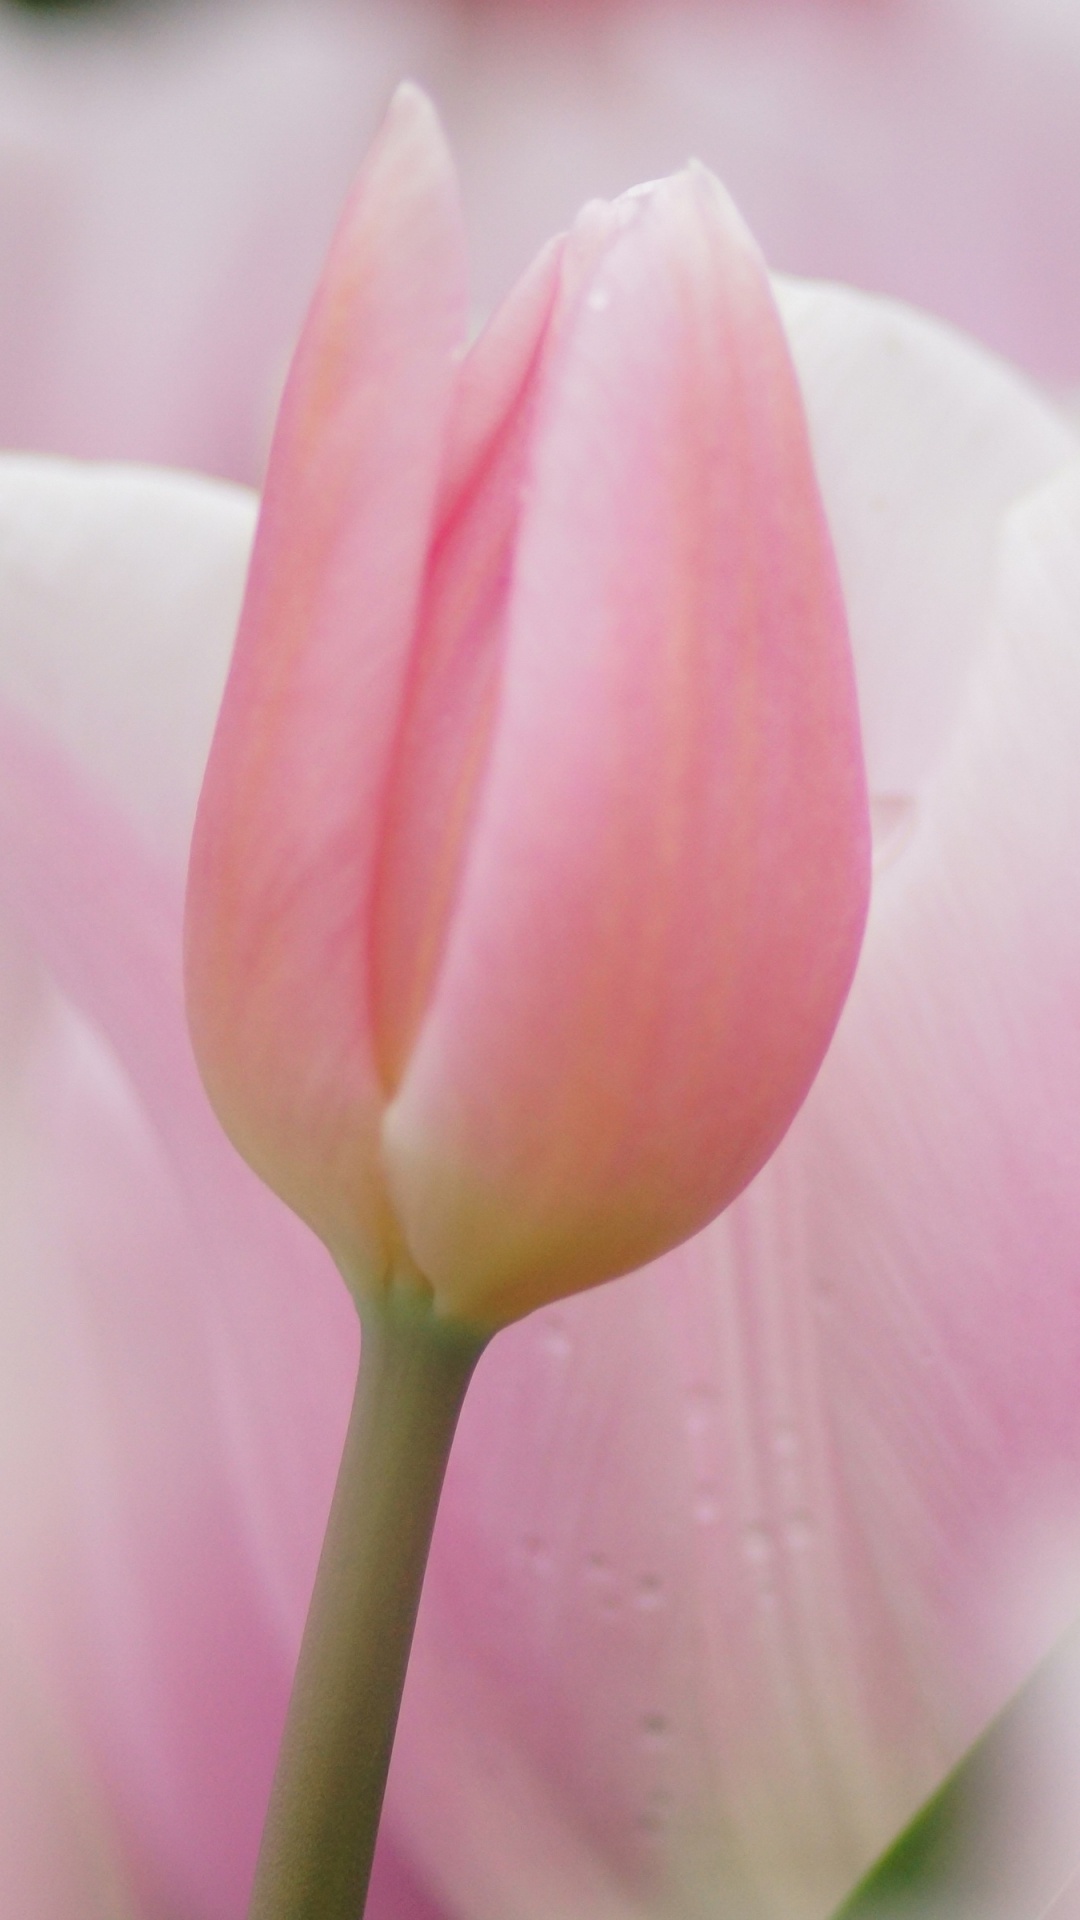 Pink Tulip in Bloom During Daytime. Wallpaper in 1080x1920 Resolution